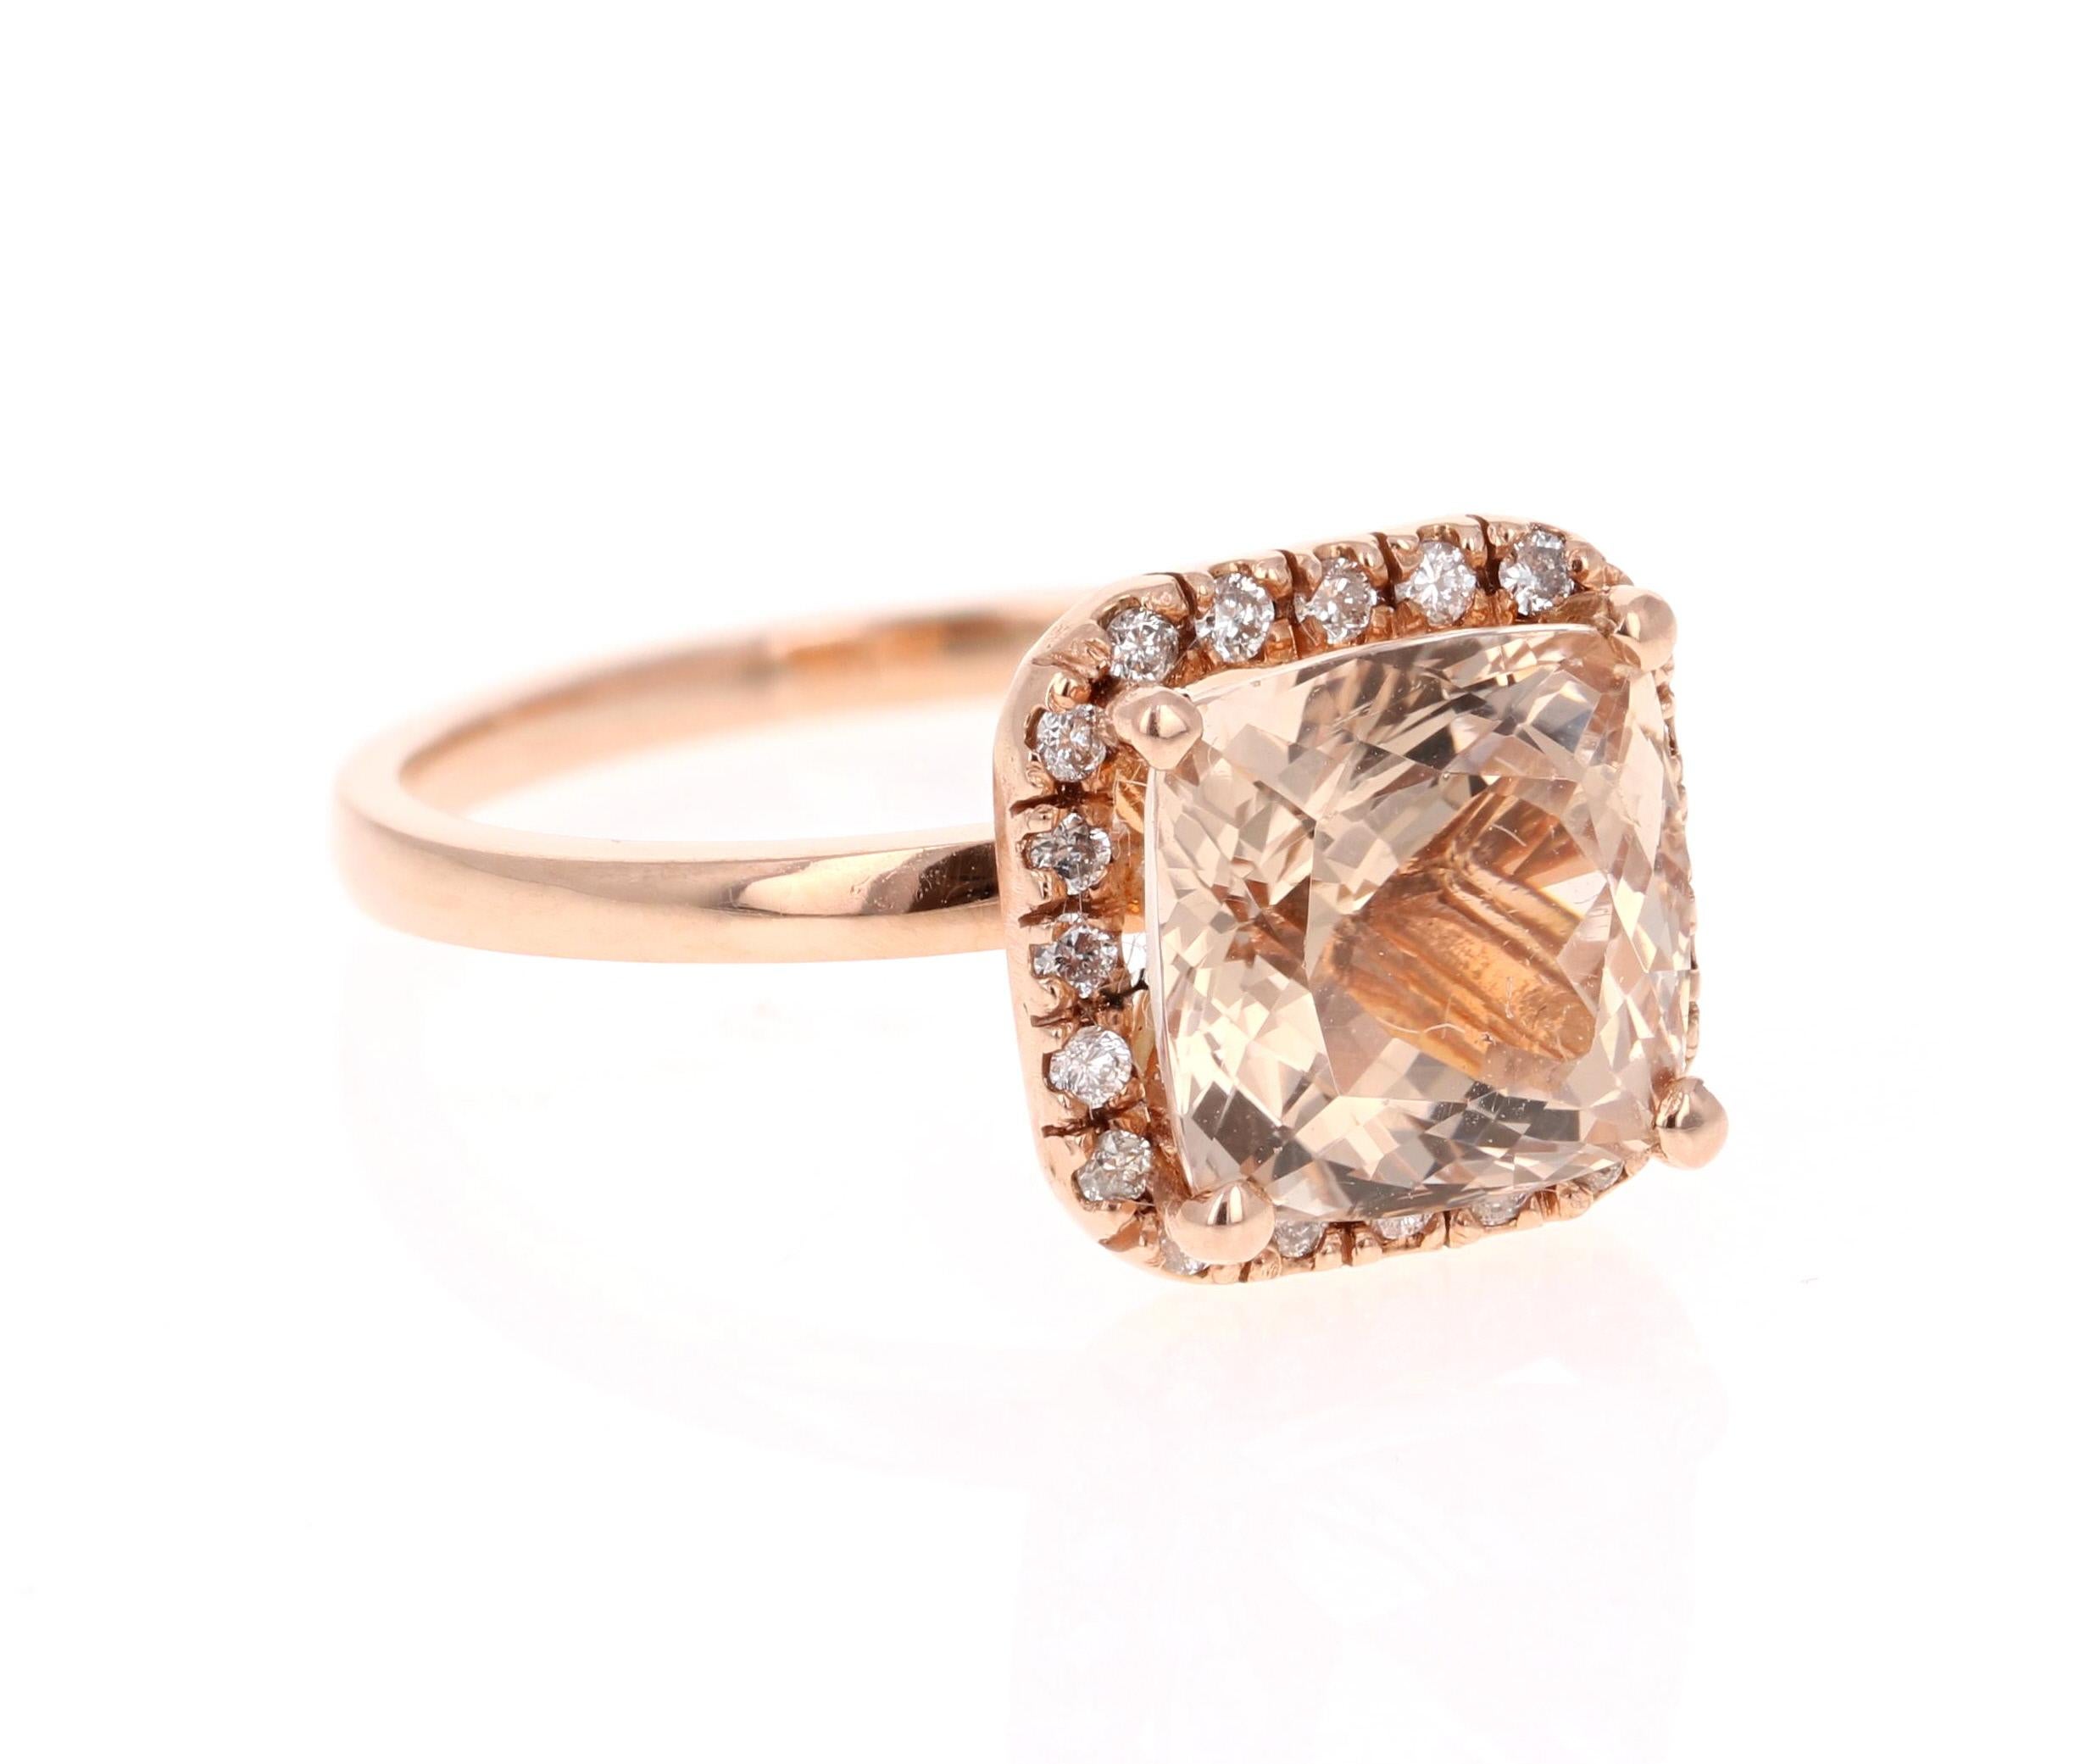 One of a Kind Engagement Ring or Cocktail Ring!

This Morganite ring has a 3.90 Carat Square Cushion Cut Morganite and is surrounded by 20 Round Cut Diamonds that weigh 0.19 Carats. The total carat weight of the ring is 4.09 Carats. 

It is crafted